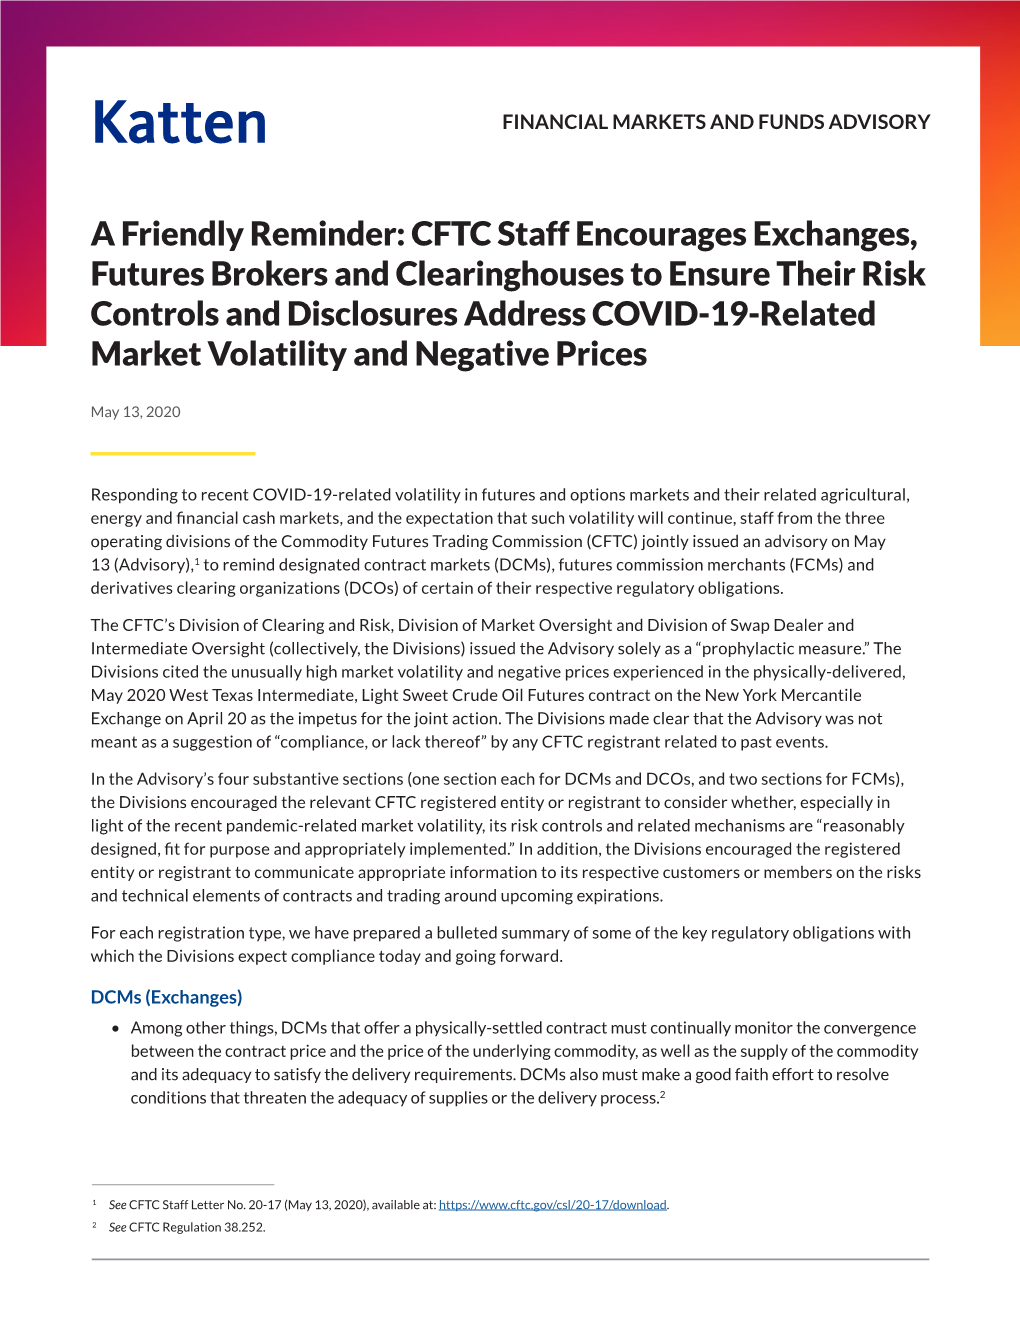 A Friendly Reminder: CFTC Staff Encourages Exchanges, Futures